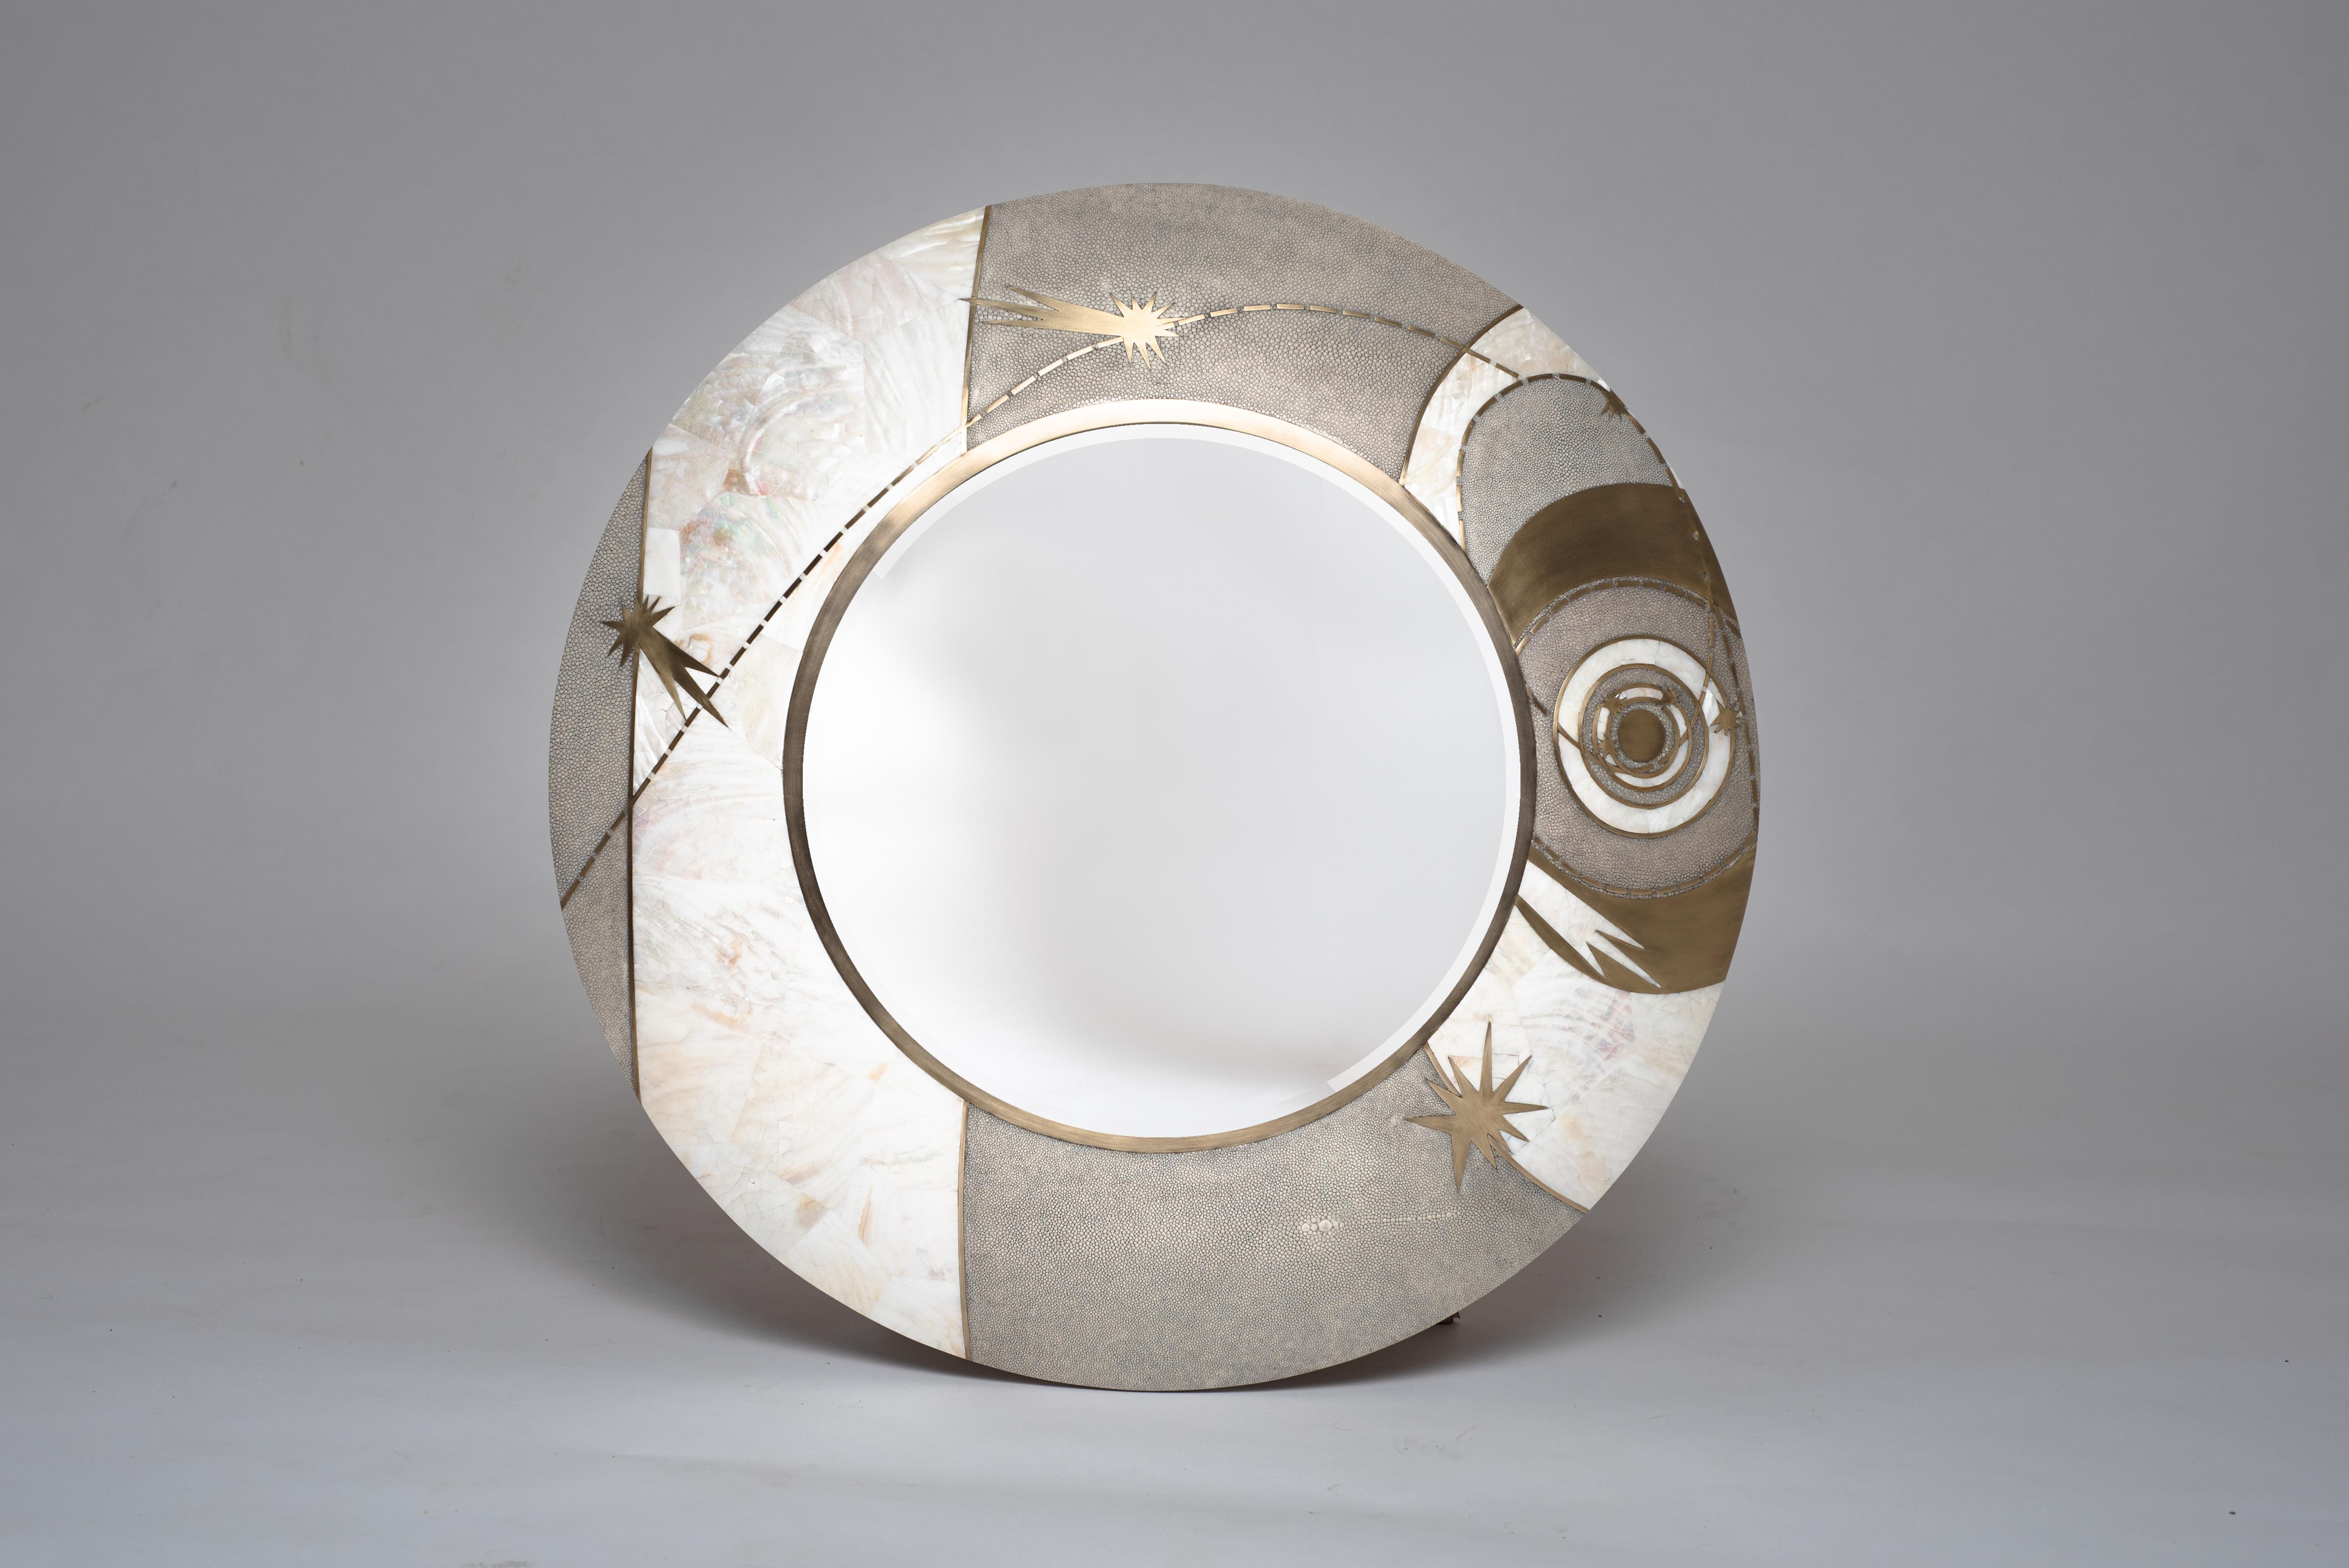 Hand-Crafted Constellation Mirror in Shagreen Shell & Bronze-Patina Brass by Kifu Paris For Sale